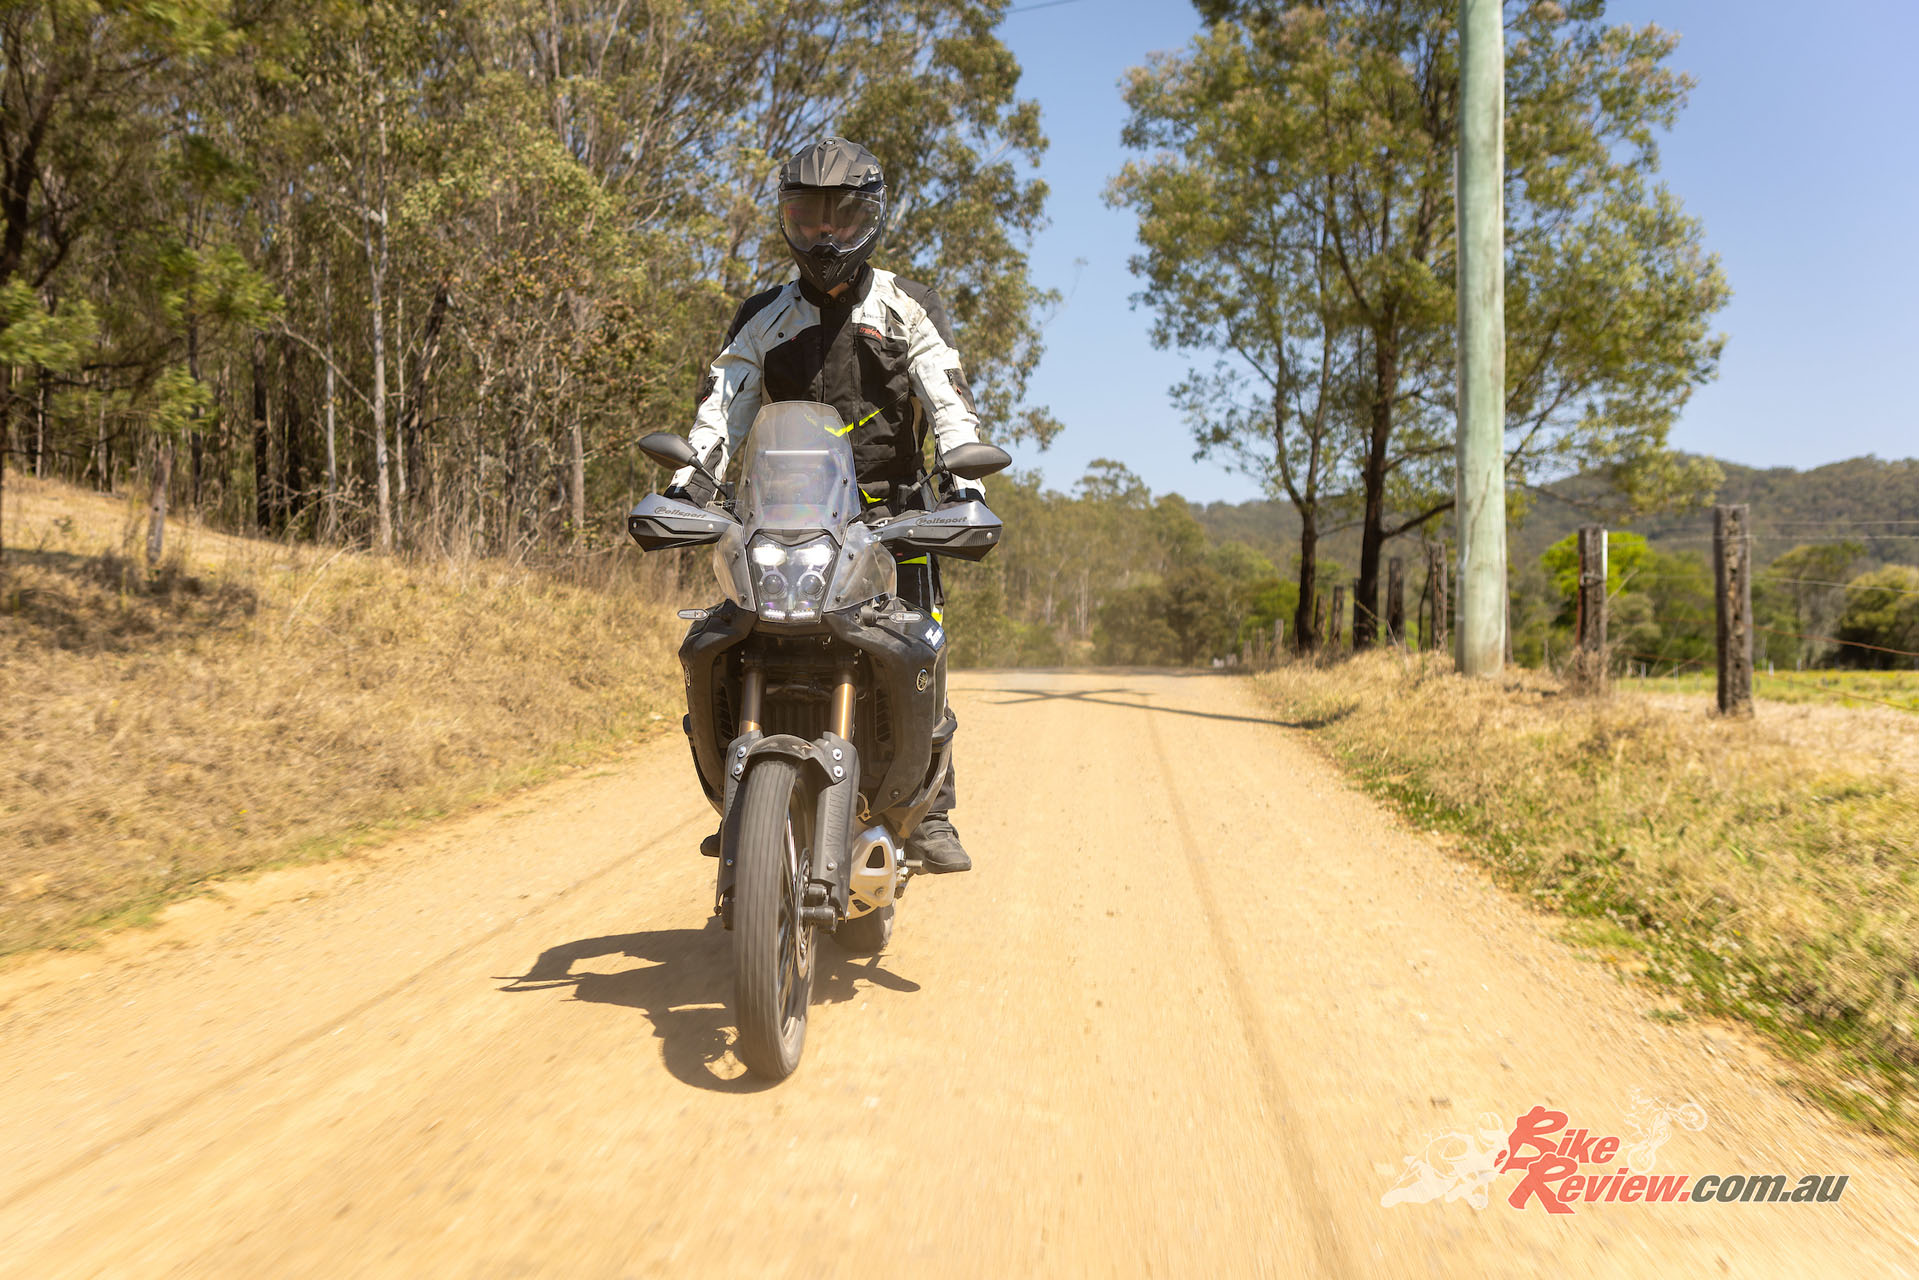 The Ténéré 700 World Raid, with its Ohlins adjustable steering damper and MST Scorpions fitted, is epic on loose roads. As speeds climb to an undisclosed amount, the World Raid stays straight as an arrow.